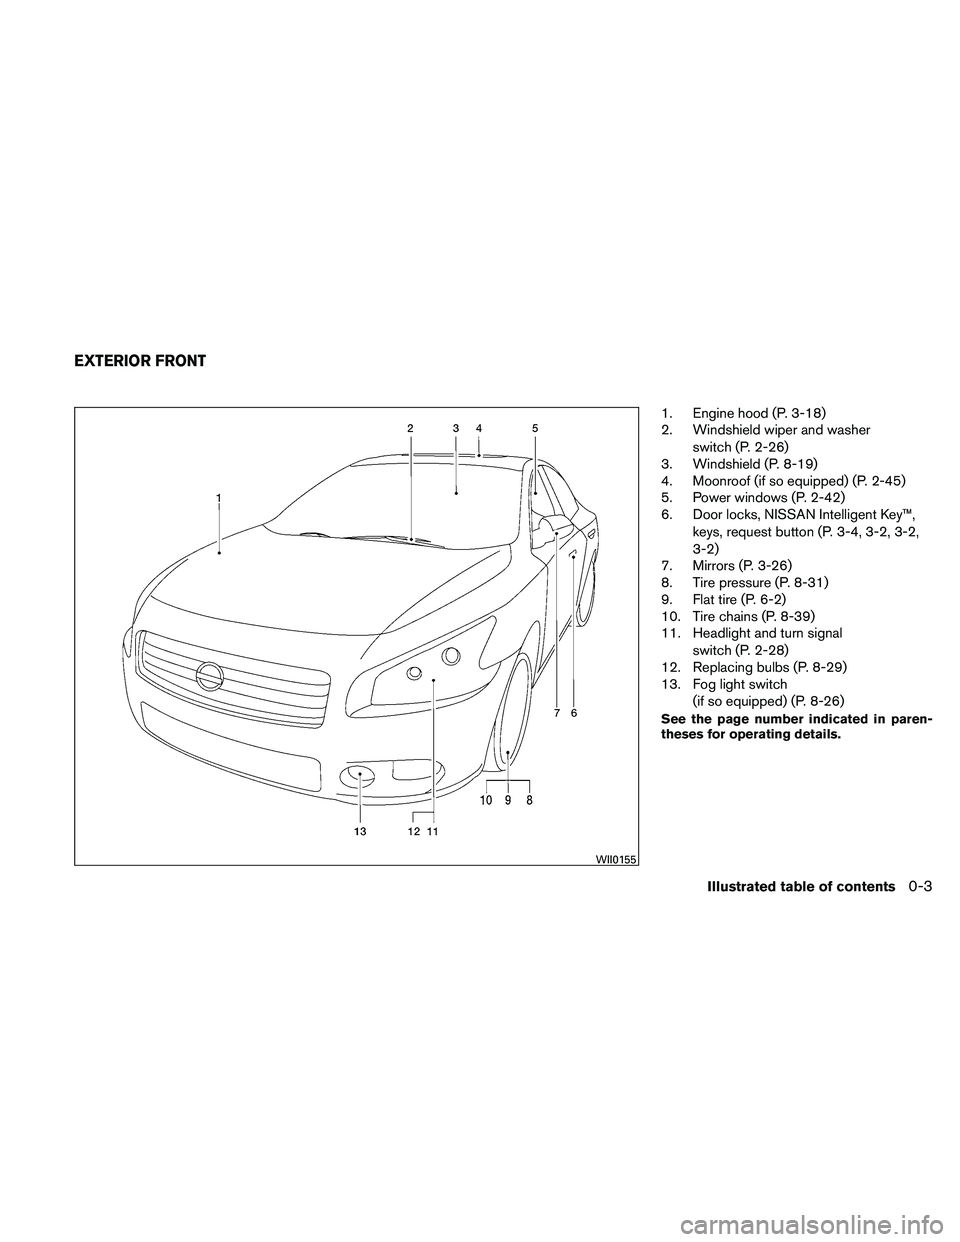 NISSAN MAXIMA 2011  Owner´s Manual 1. Engine hood (P. 3-18)
2. Windshield wiper and washerswitch (P. 2-26)
3. Windshield (P. 8-19)
4. Moonroof (if so equipped) (P. 2-45)
5. Power windows (P. 2-42)
6. Door locks, NISSAN Intelligent Key�